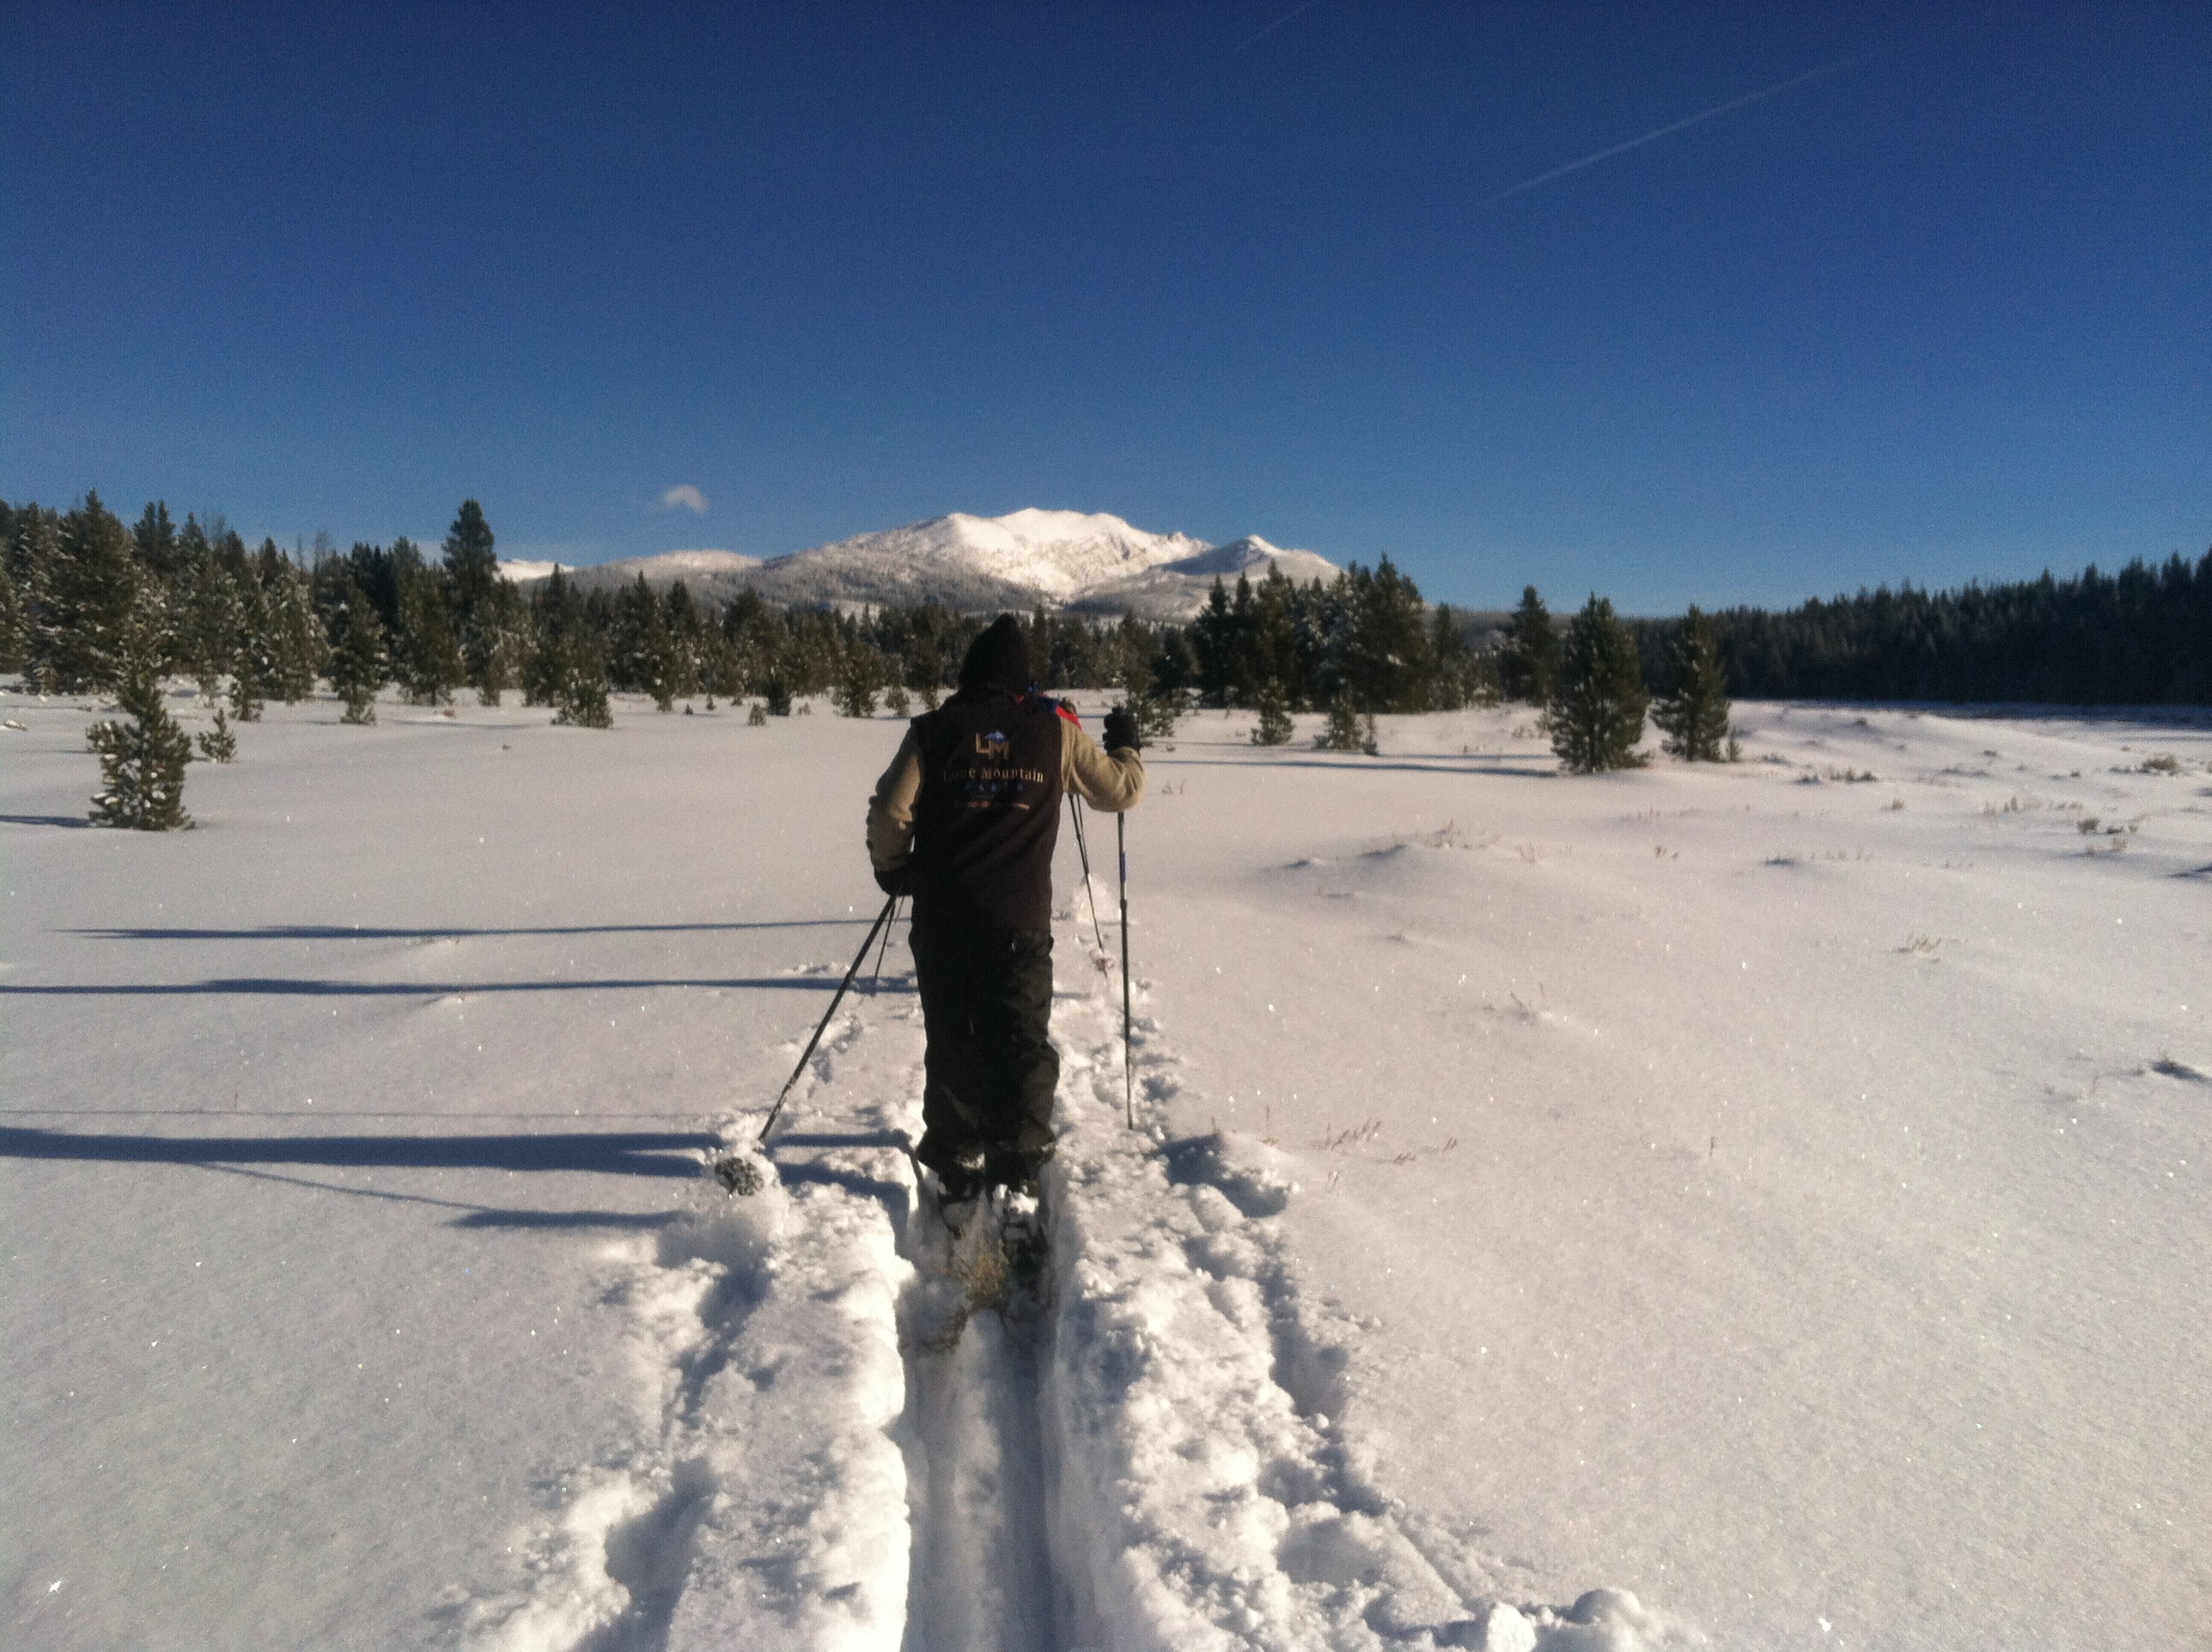 The joys of exploring the Yellowstone backcountry on skinny skis. 